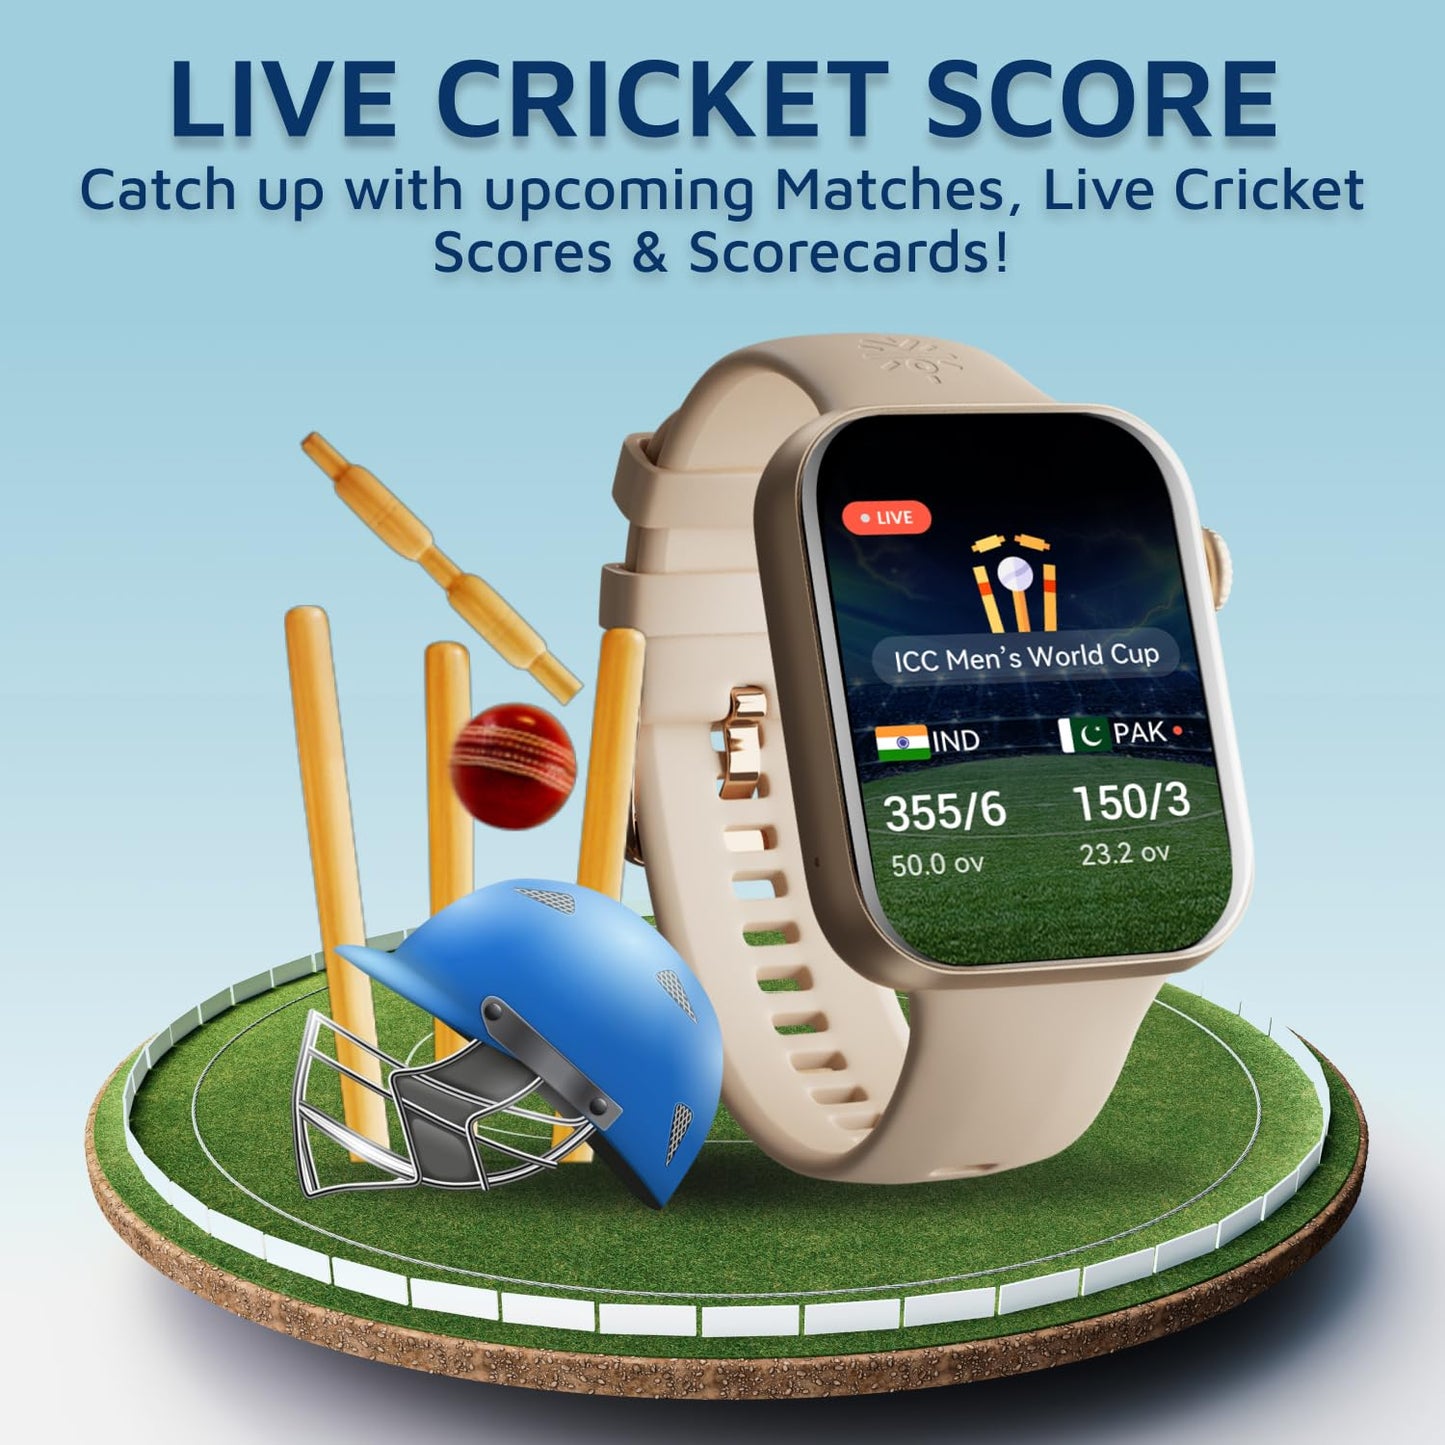 Cultsport Burn Plus 1.78" Amoled, Live Cricket Score, 368 * 448 Best-in-Class Resolution, BT Calling, Crown Control, Always on Display, 7 Days Battery Life (Rose Gold Silicone Strap)